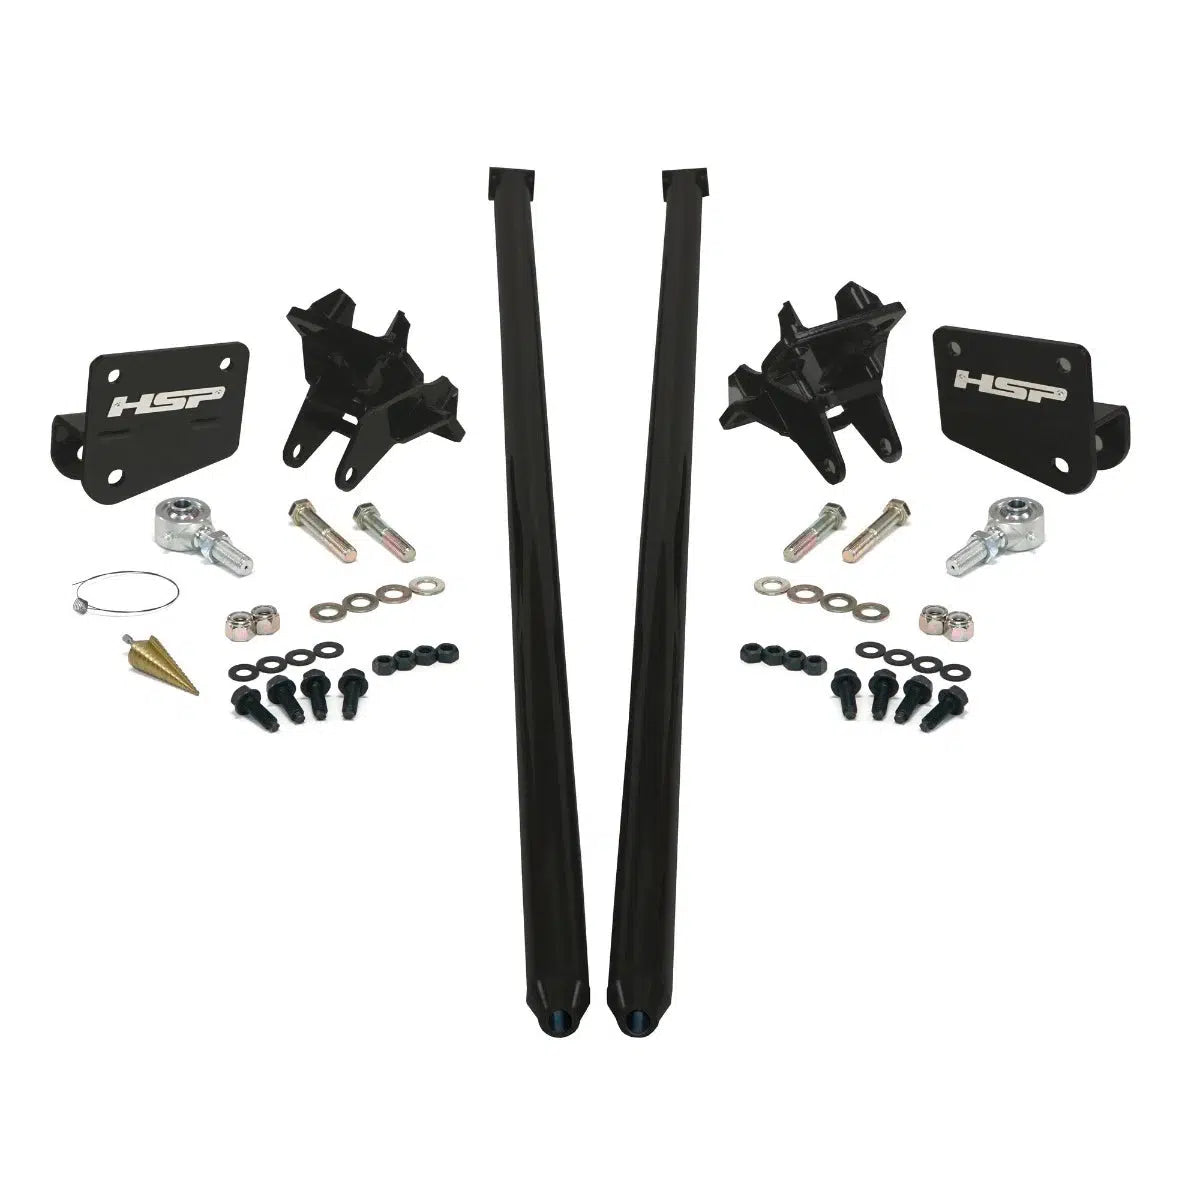 2011-2017 Powerstroke Traction Bars (ECLB,CCSB) (HSP-P-435-2-3-HSP)-Traction Bars-HSP Diesel-HSP-P-435-1-3-HSP-GB-Dirty Diesel Customs